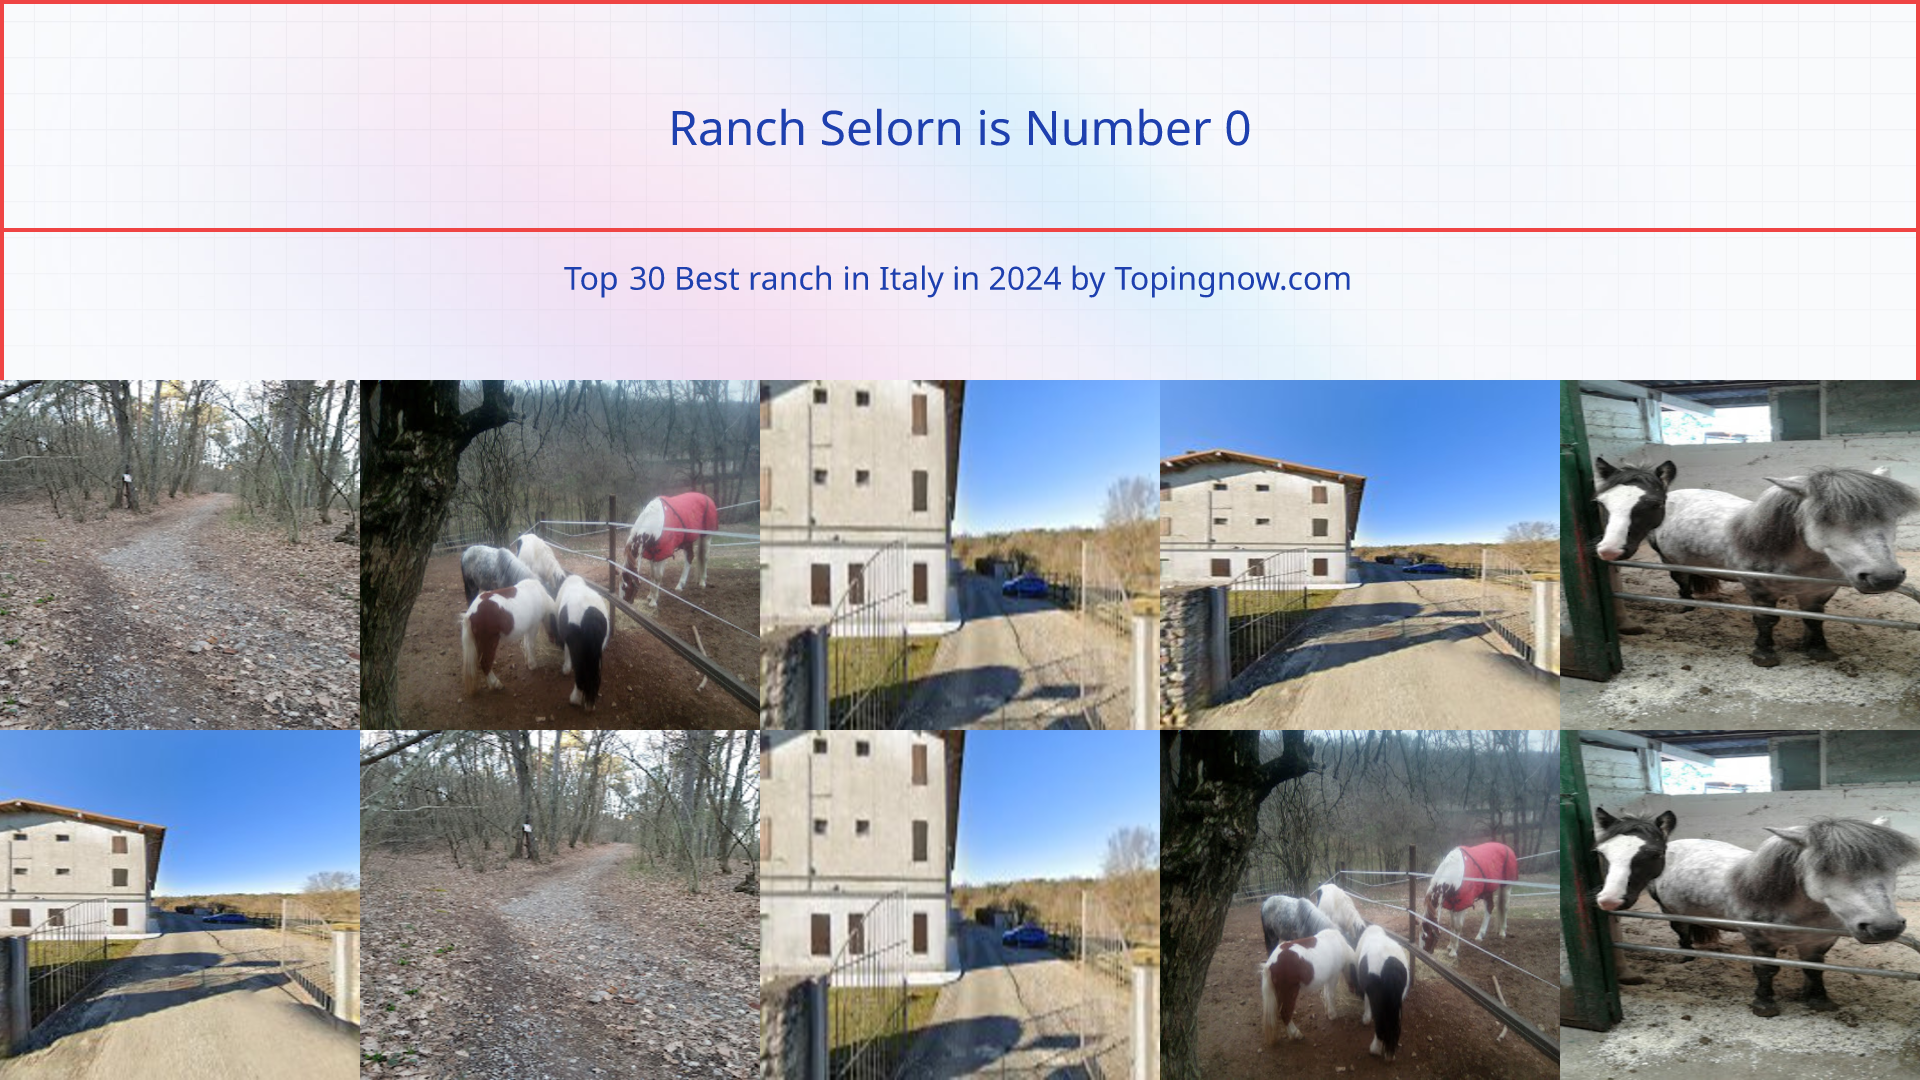 Ranch Selorn: Top 30 Best ranch in Italy in 2024